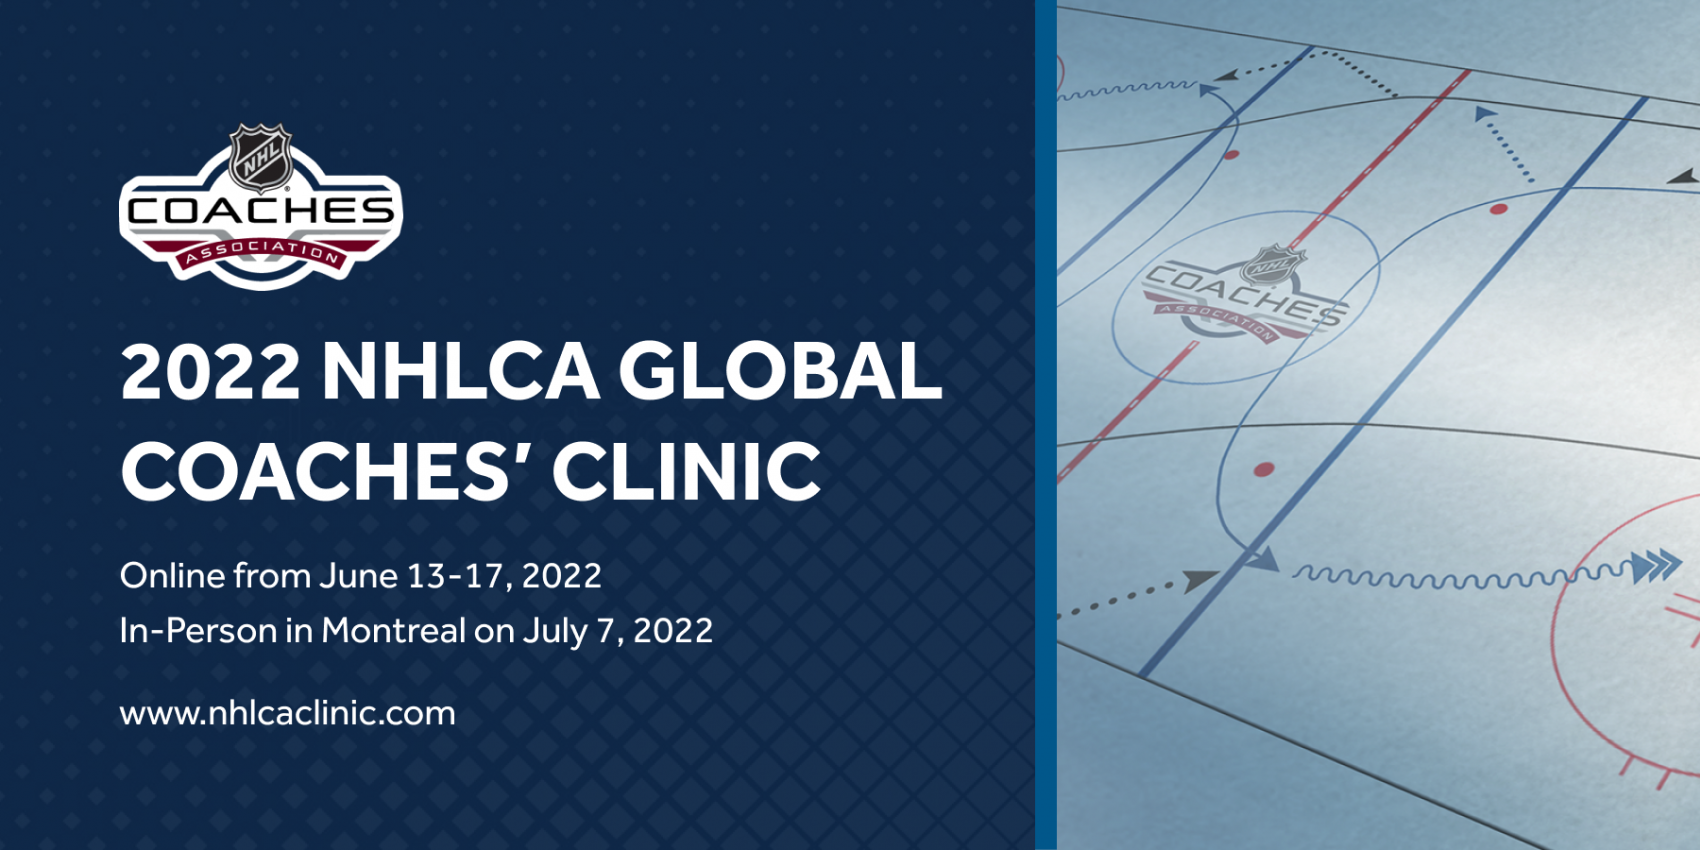 CoachThem at the 2022 NHLCA Global Coaches' Clinic